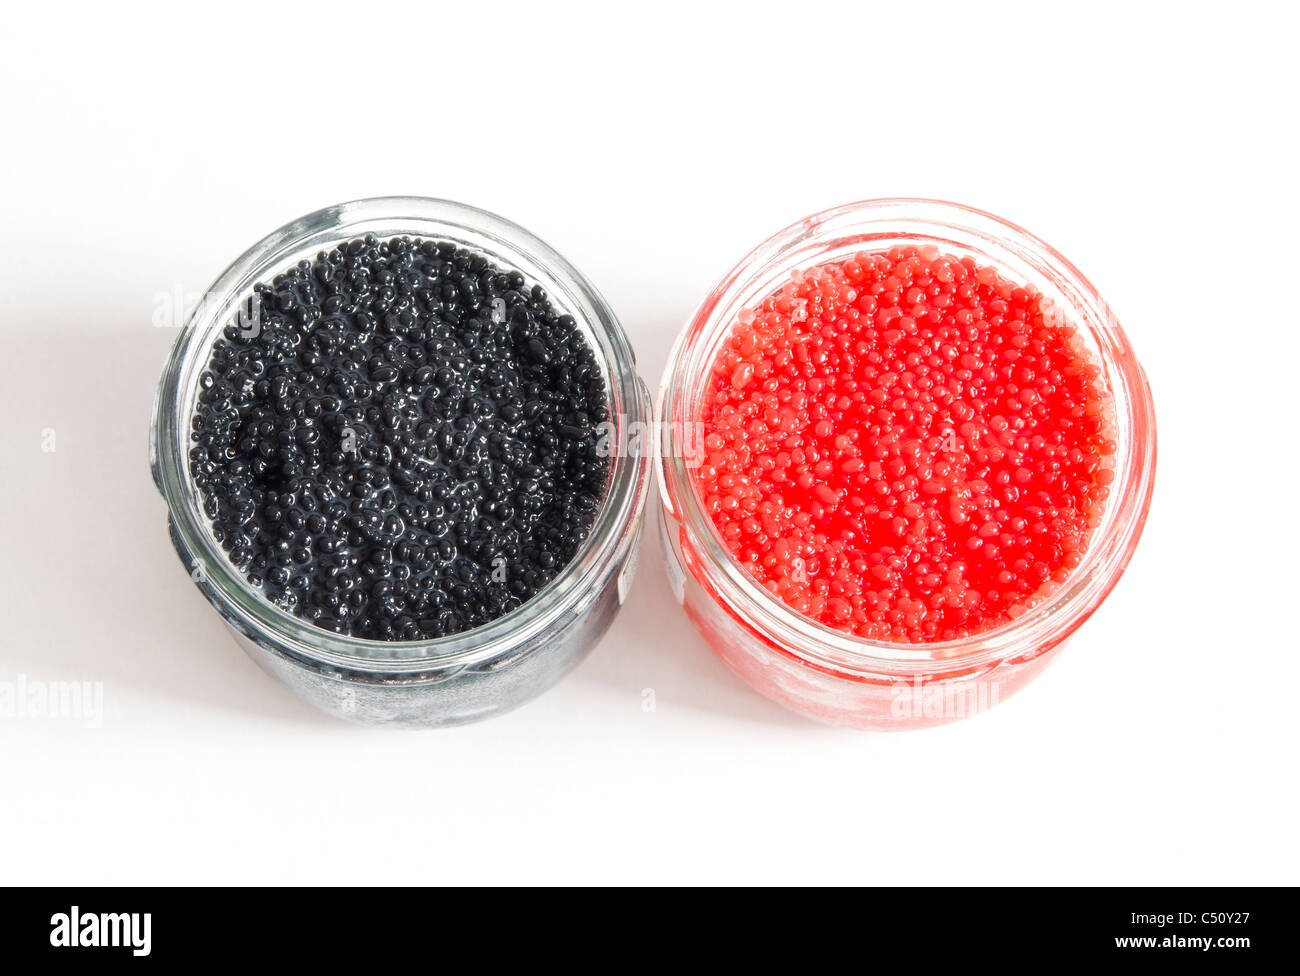 red and black caviar in glass jars on withe background Stock Photo